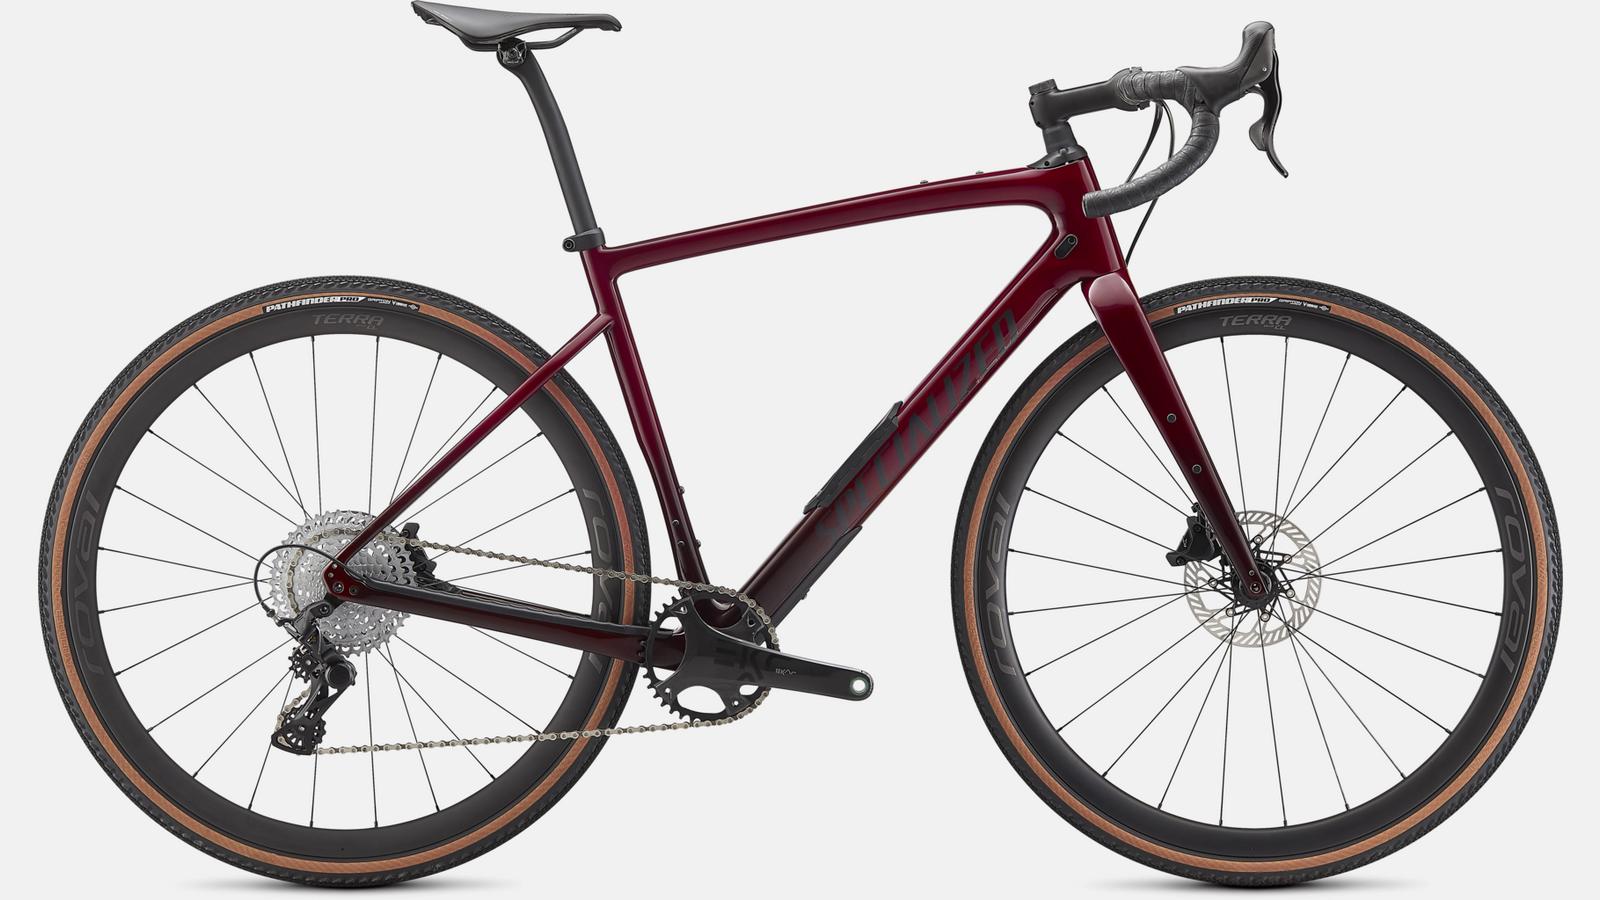 Paint for 2021 Specialized Diverge Pro Carbon – Campagnolo LTD - Gloss Maroon